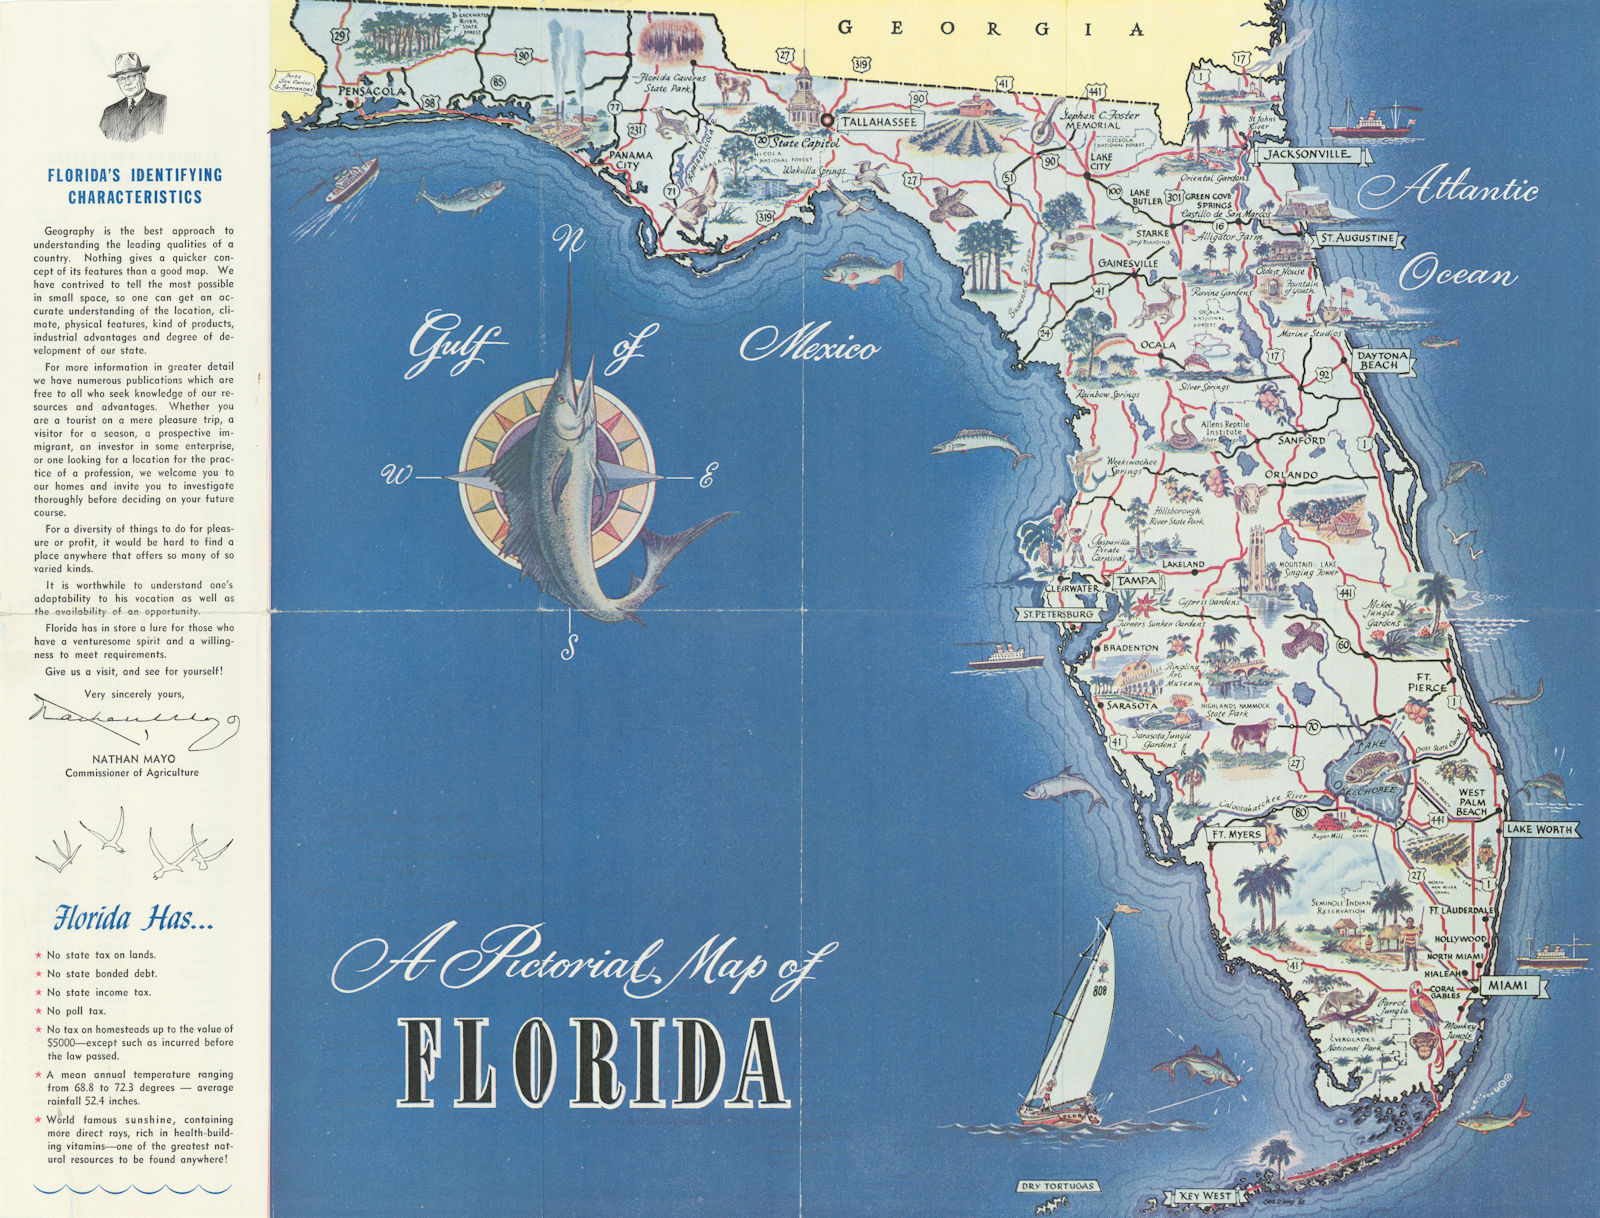 Associate Product A Pictorial Map of Florida by George D. Way 1951 old vintage plan chart